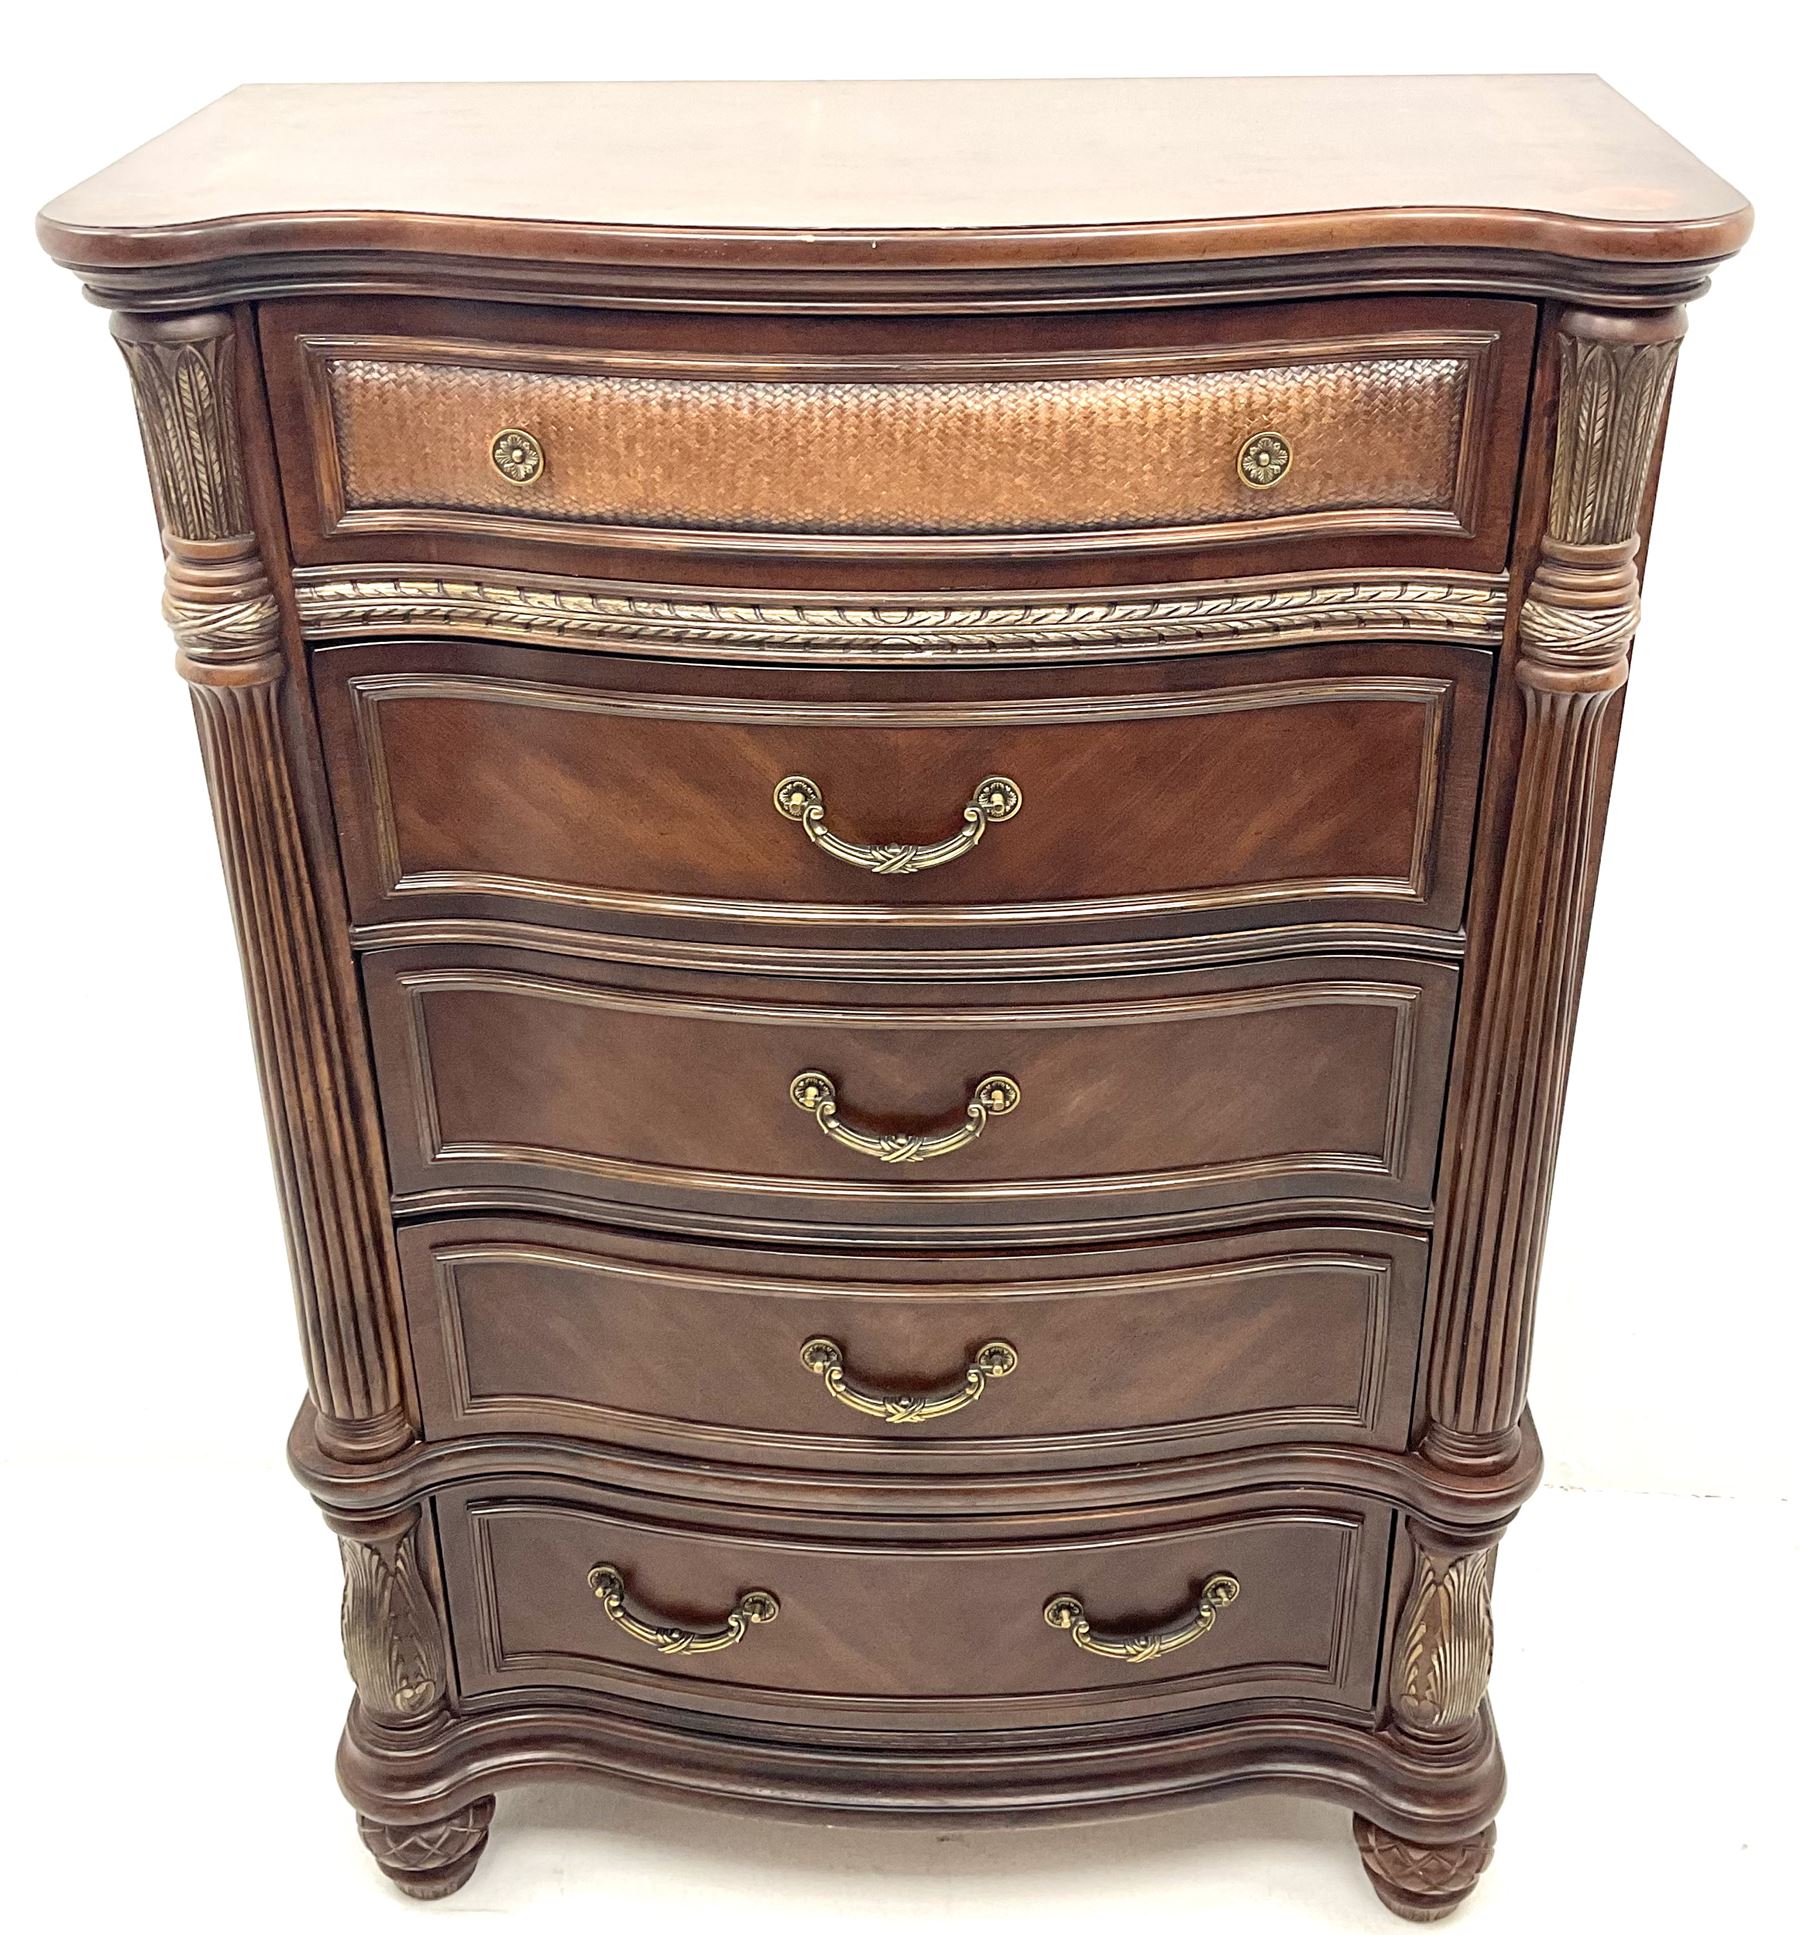 Kevin Charles American walnut serpentine chest - Image 4 of 6